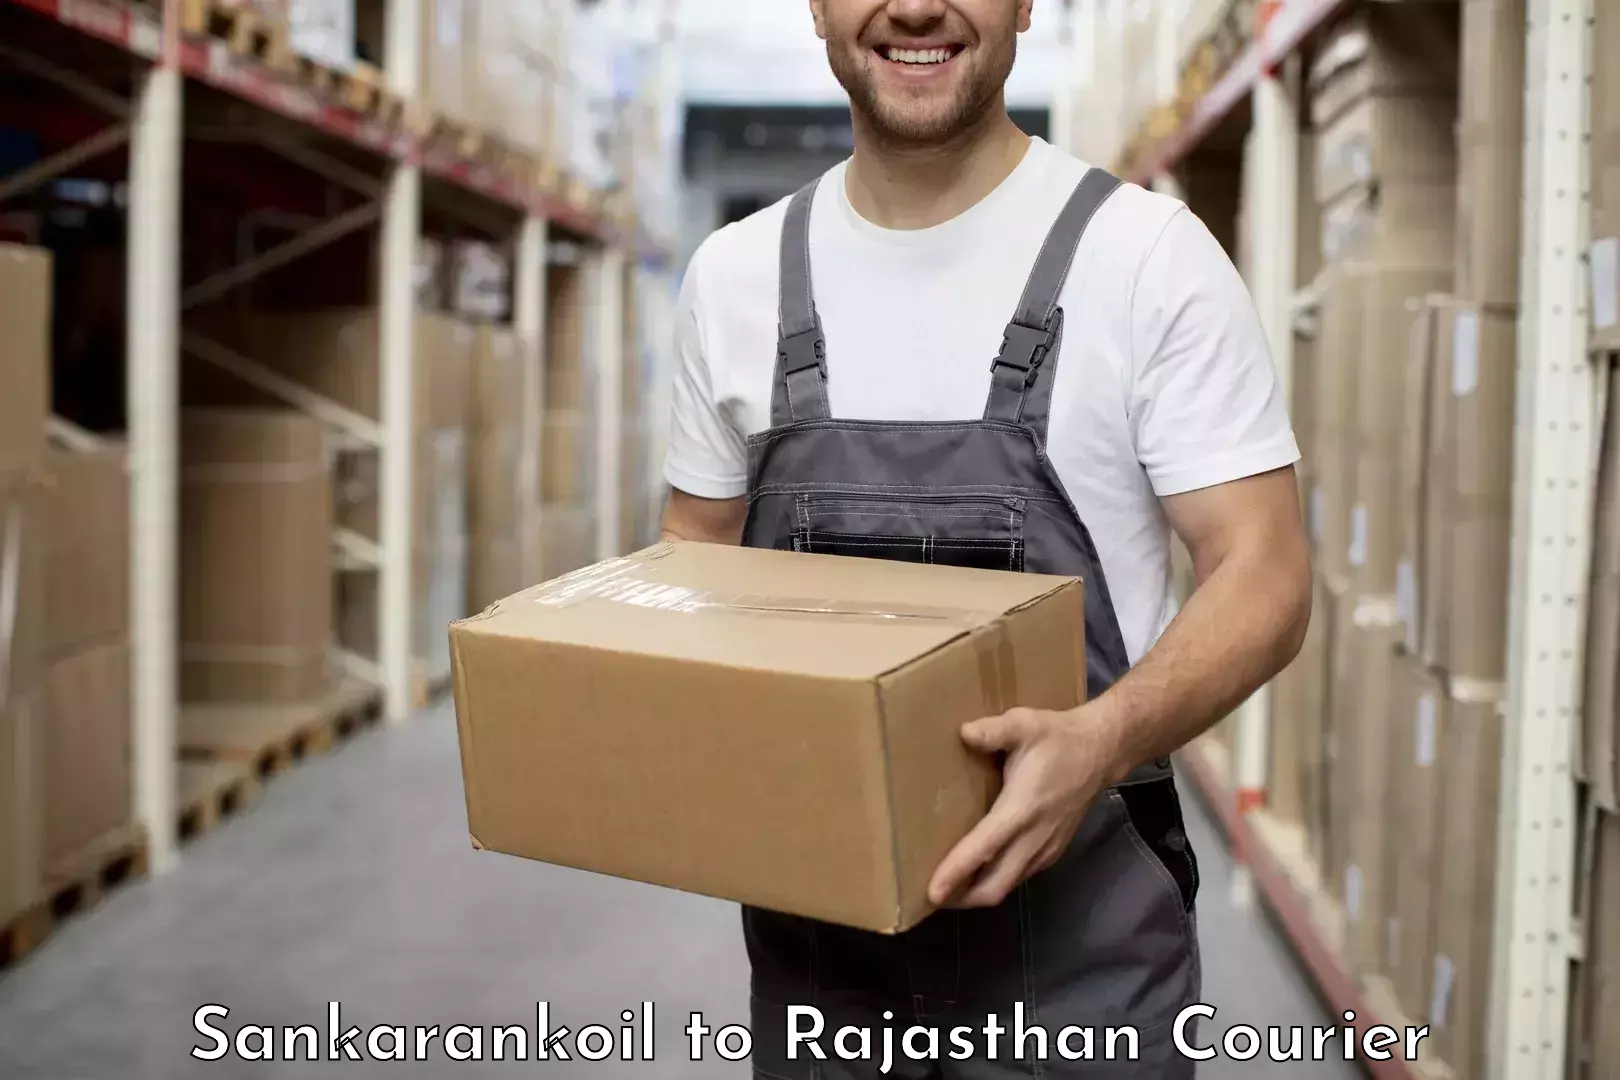 Flexible delivery schedules Sankarankoil to Rajasthan